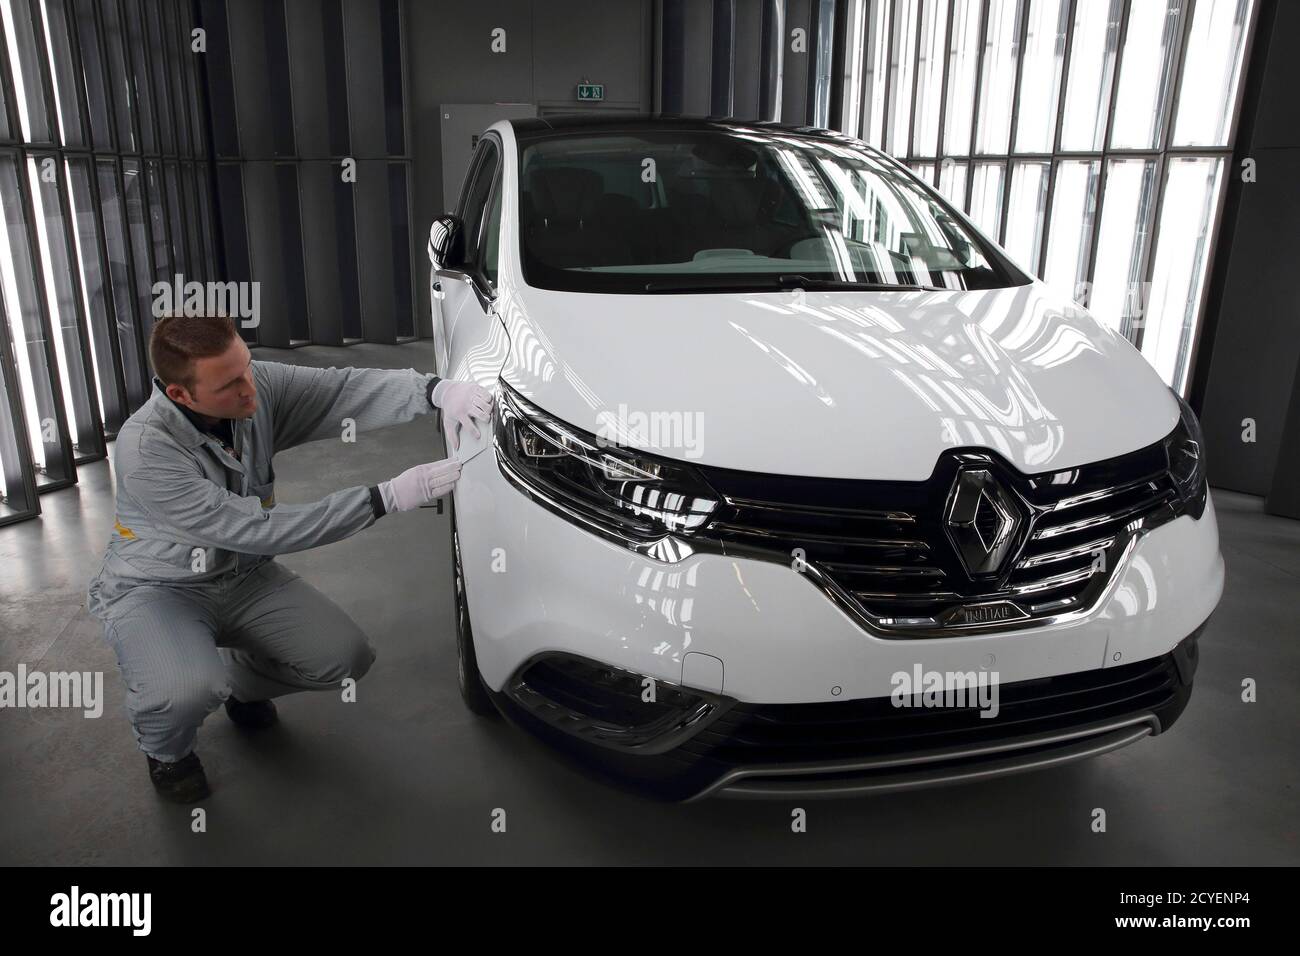 An employee inspects the paint of a new Renault Espace car at the paint  shop of the Renault sutomobile assembly plant in Douai, northern France,  November 26, 2014. REUTERS/Pascal Rossignol (FRANCE -